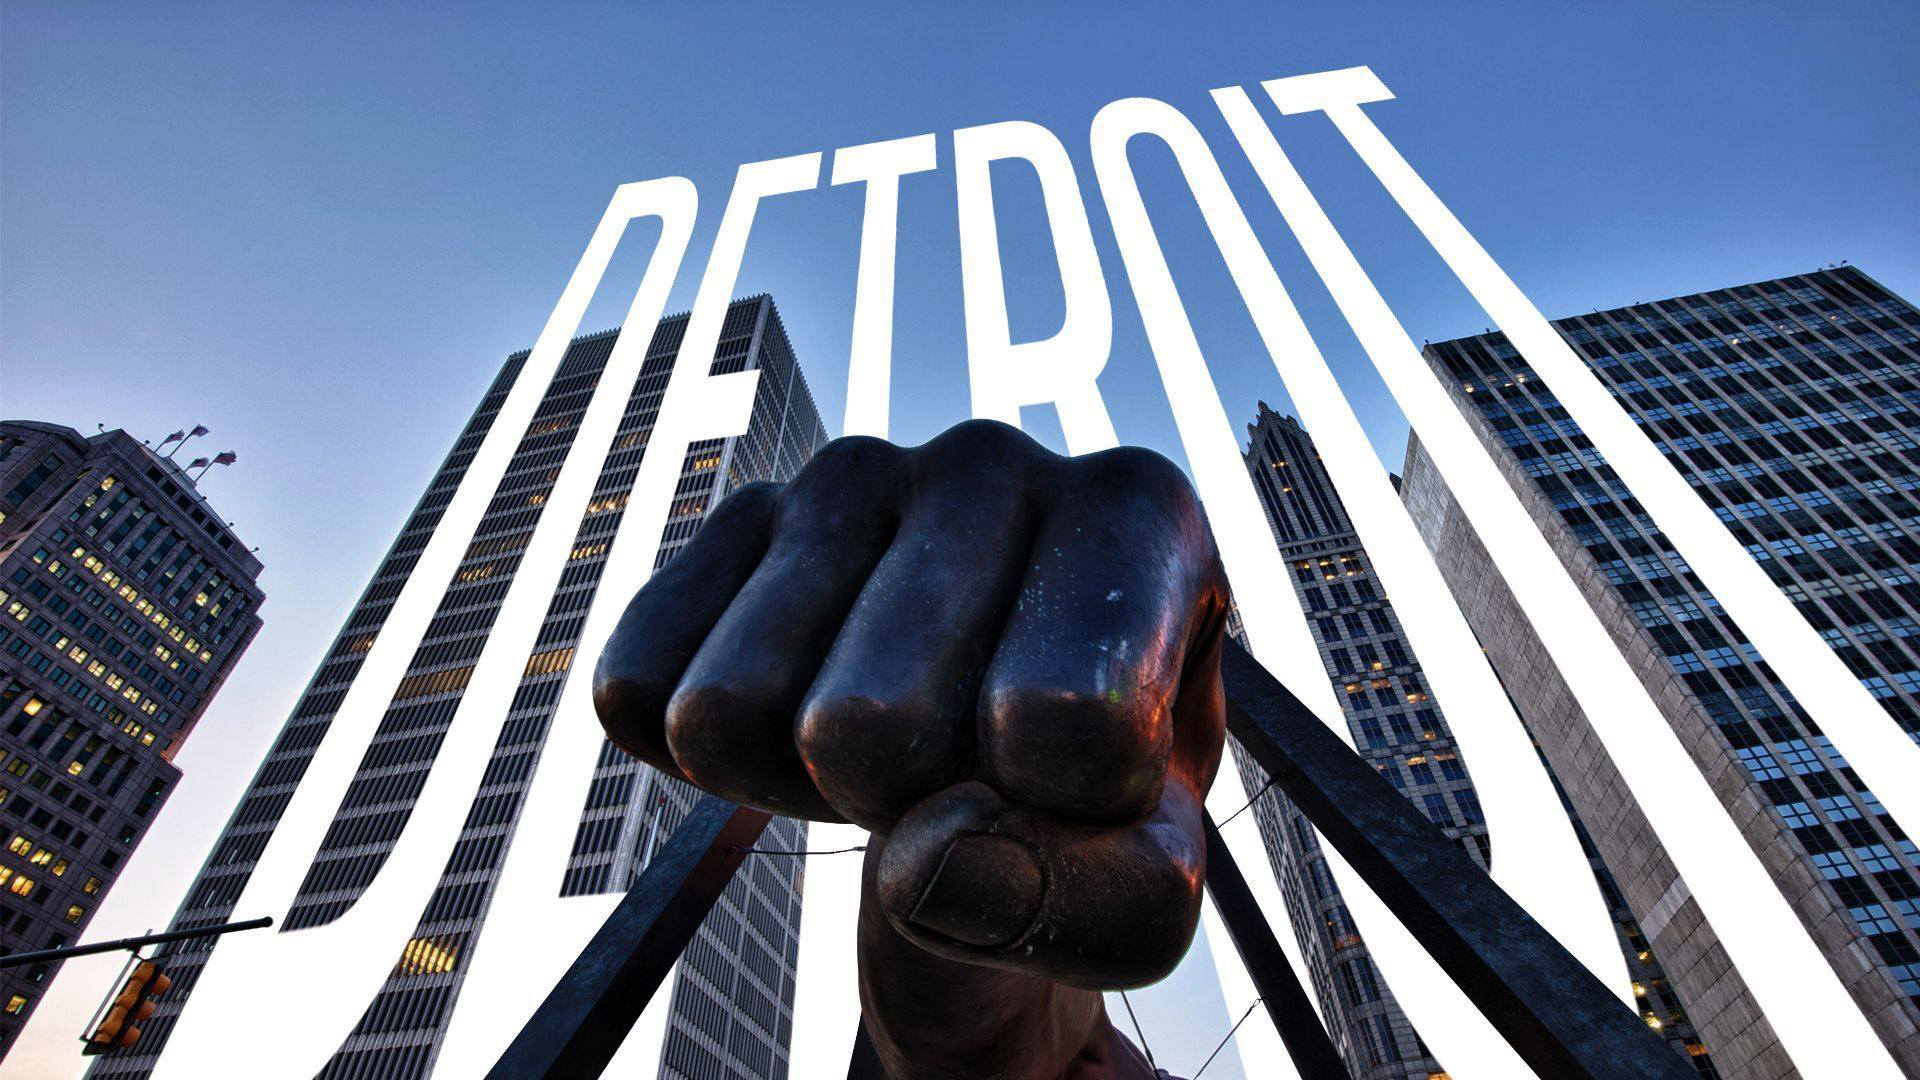 Detroit Iphone Wallpapers